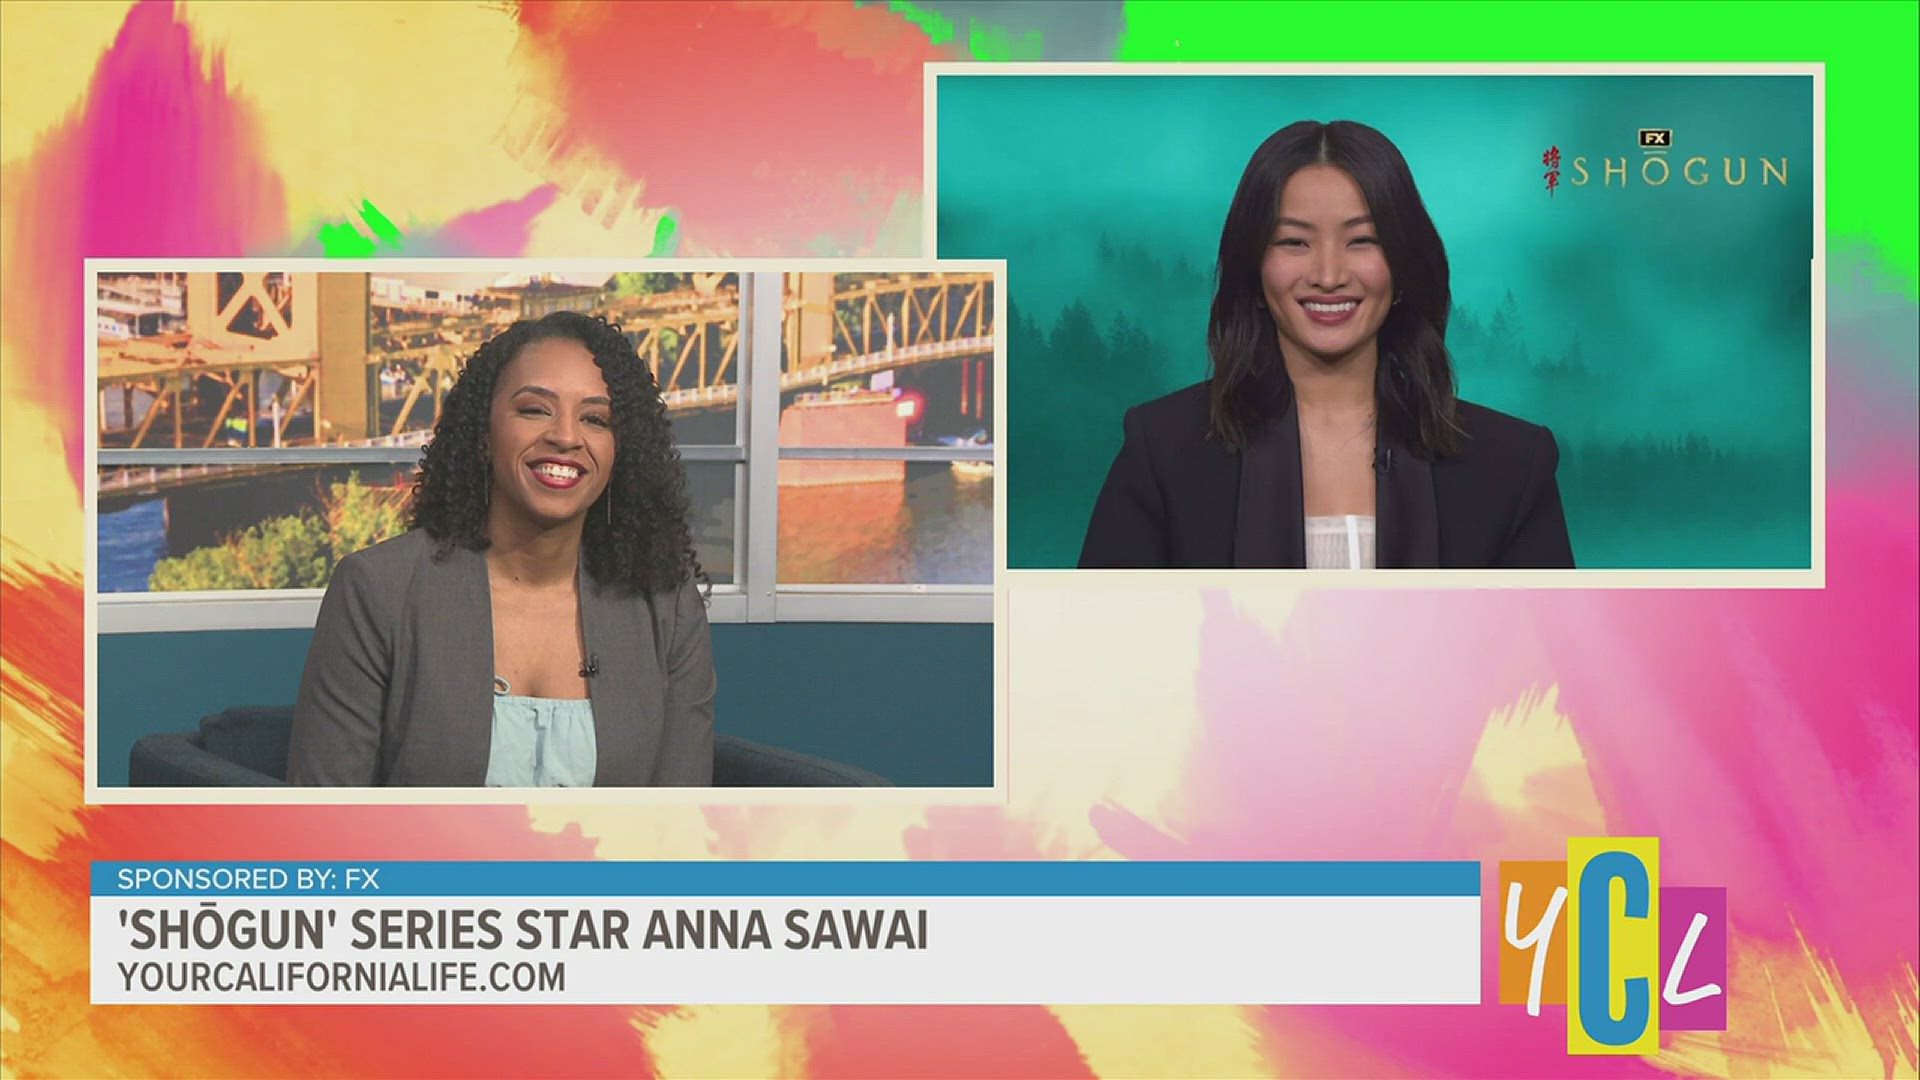 "Shōgun" has gotten rave reviews and is one of the most buzzed about new series. Watch our chat with the series star Anna Sawai. Sponsored by FX.